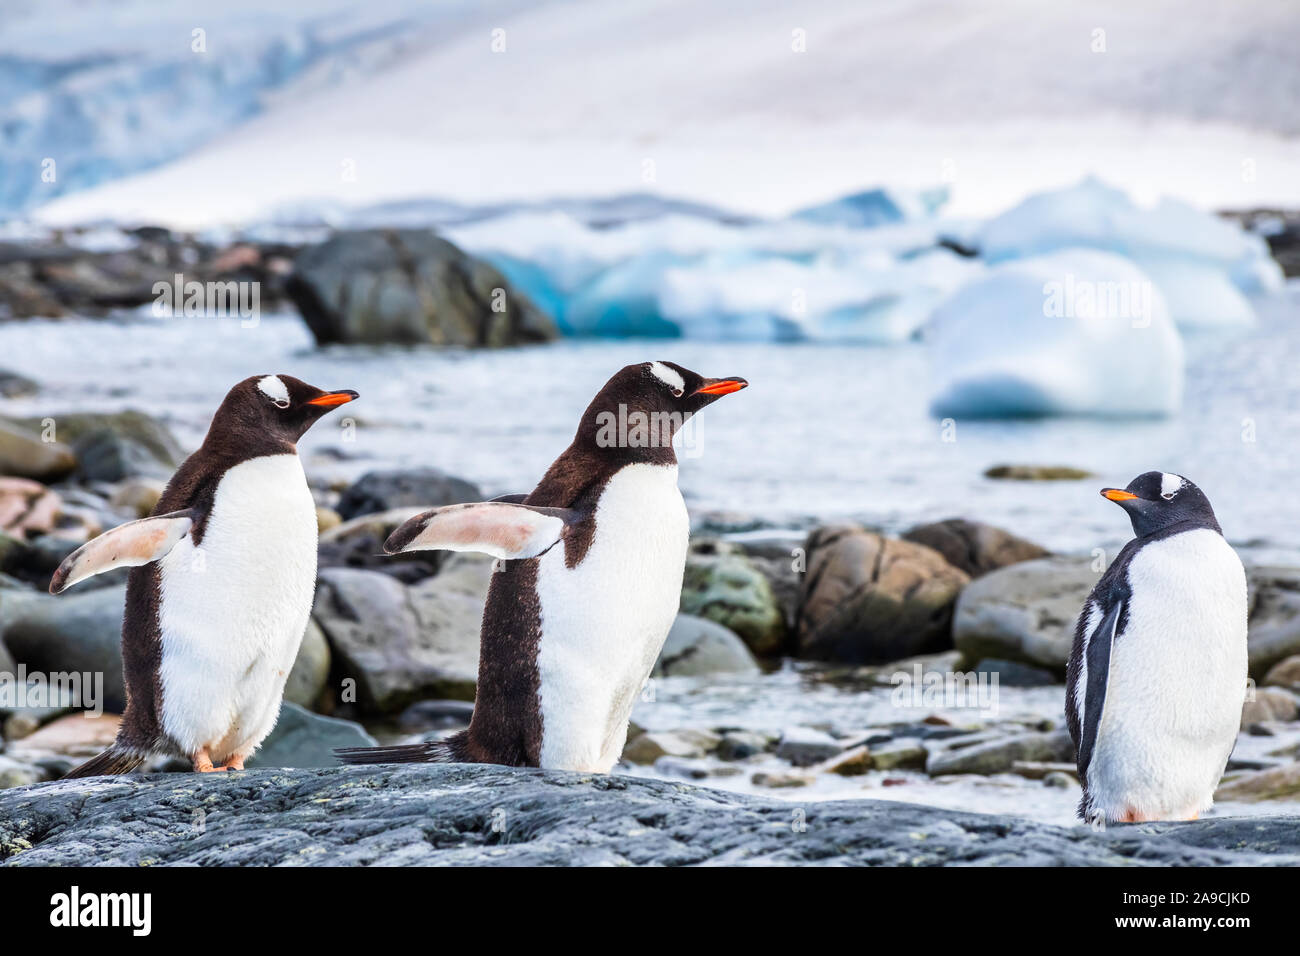 Juvenile Gentoo Penguin chick with its parents in Antarctica, seabird colony near the sea with icebergs, Antarctic Peninsula, breeding Stock Photo